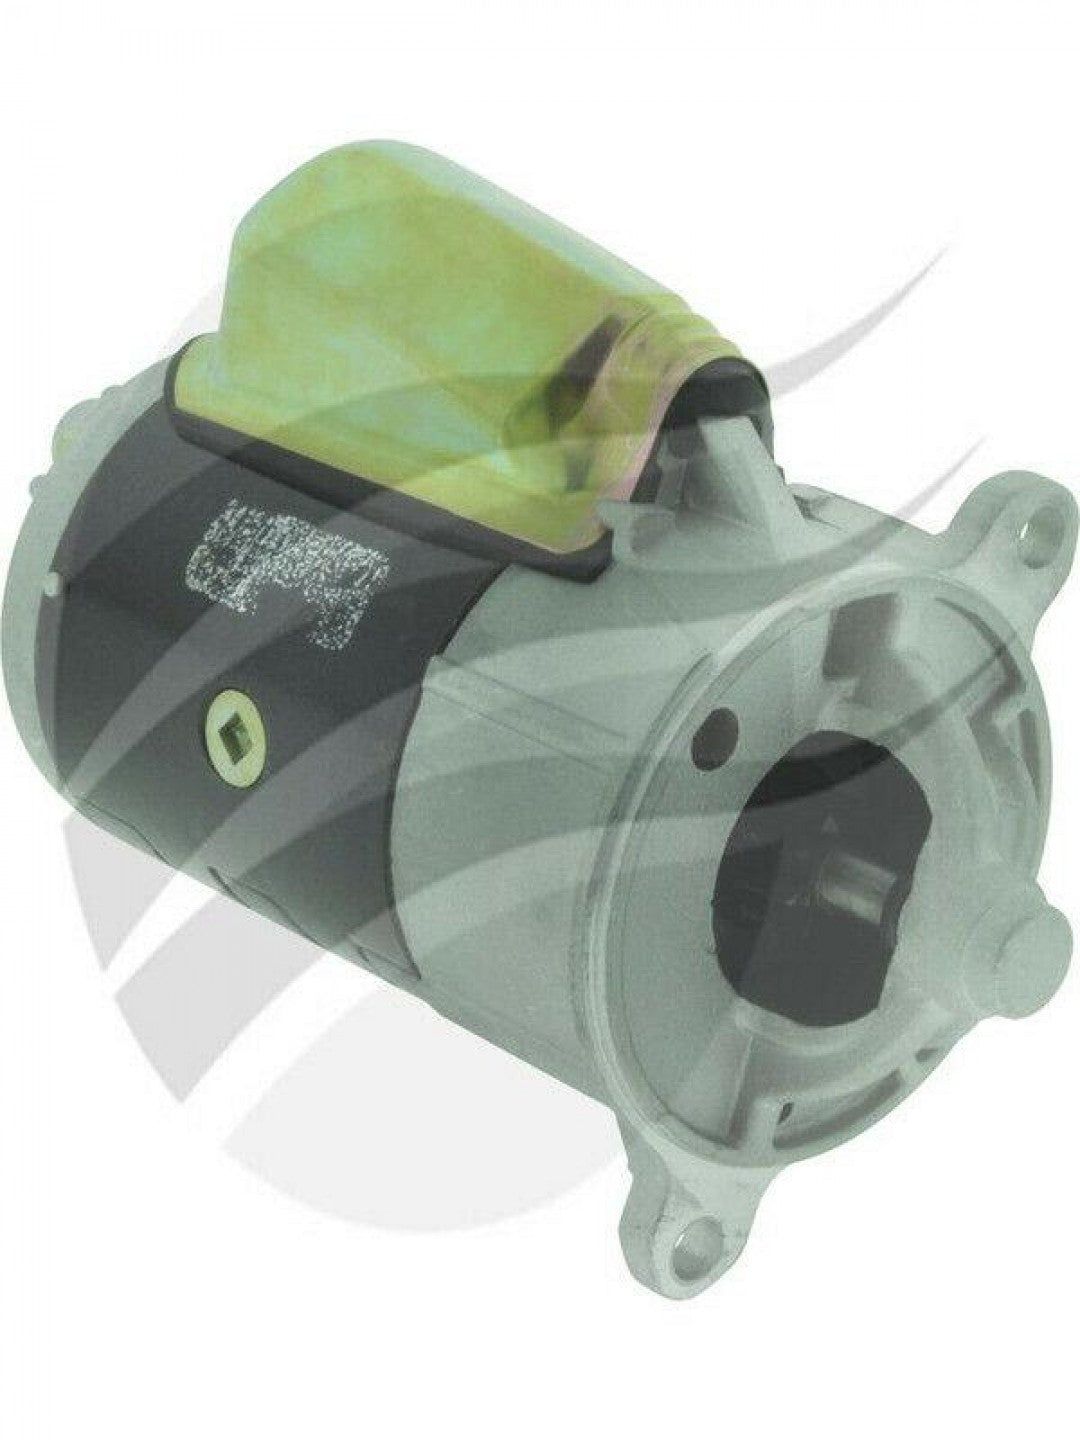 Jaylec - Starter 12 Volts 1.5Kw 9T Cw Clapper Ford V8 Early, Manual Trans